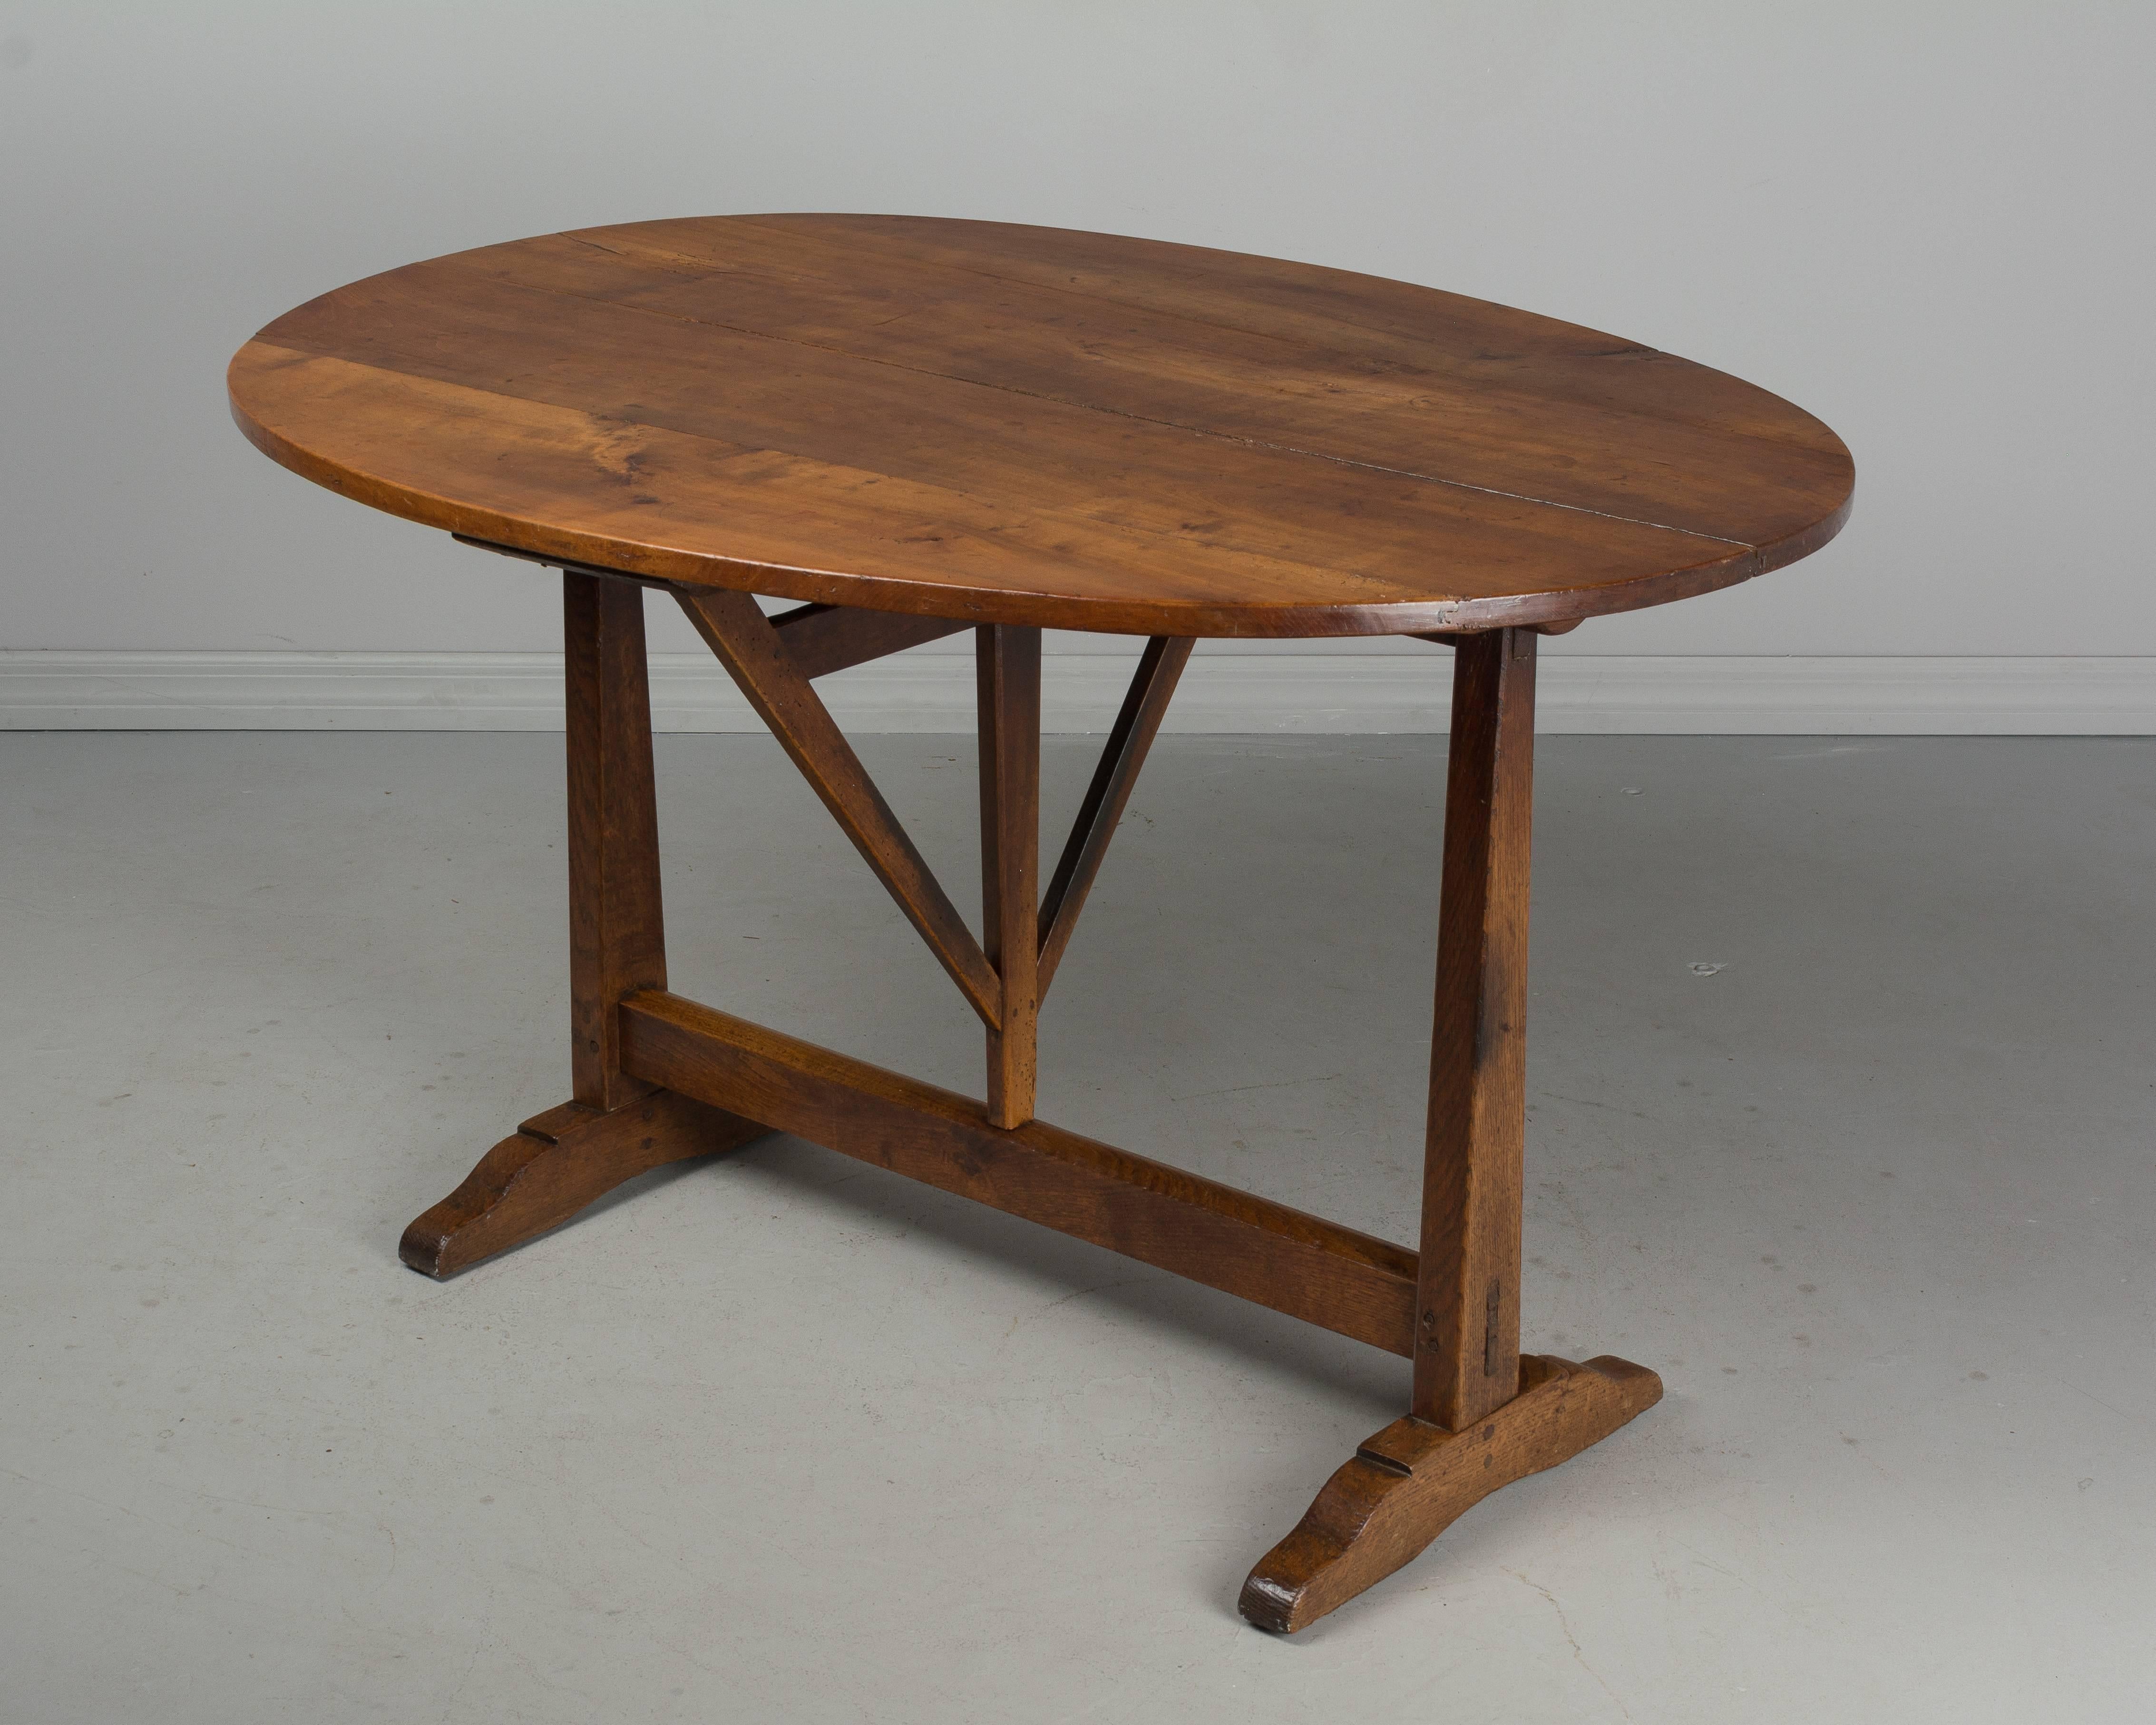 A 19th century French tilt-top oval wine tasting table with a top made of four planks of cherrywood and an oak base. Sturdy and well crafted with beautiful wood grain. In good condition with a slightly warped surface and with normal shrinkage on the